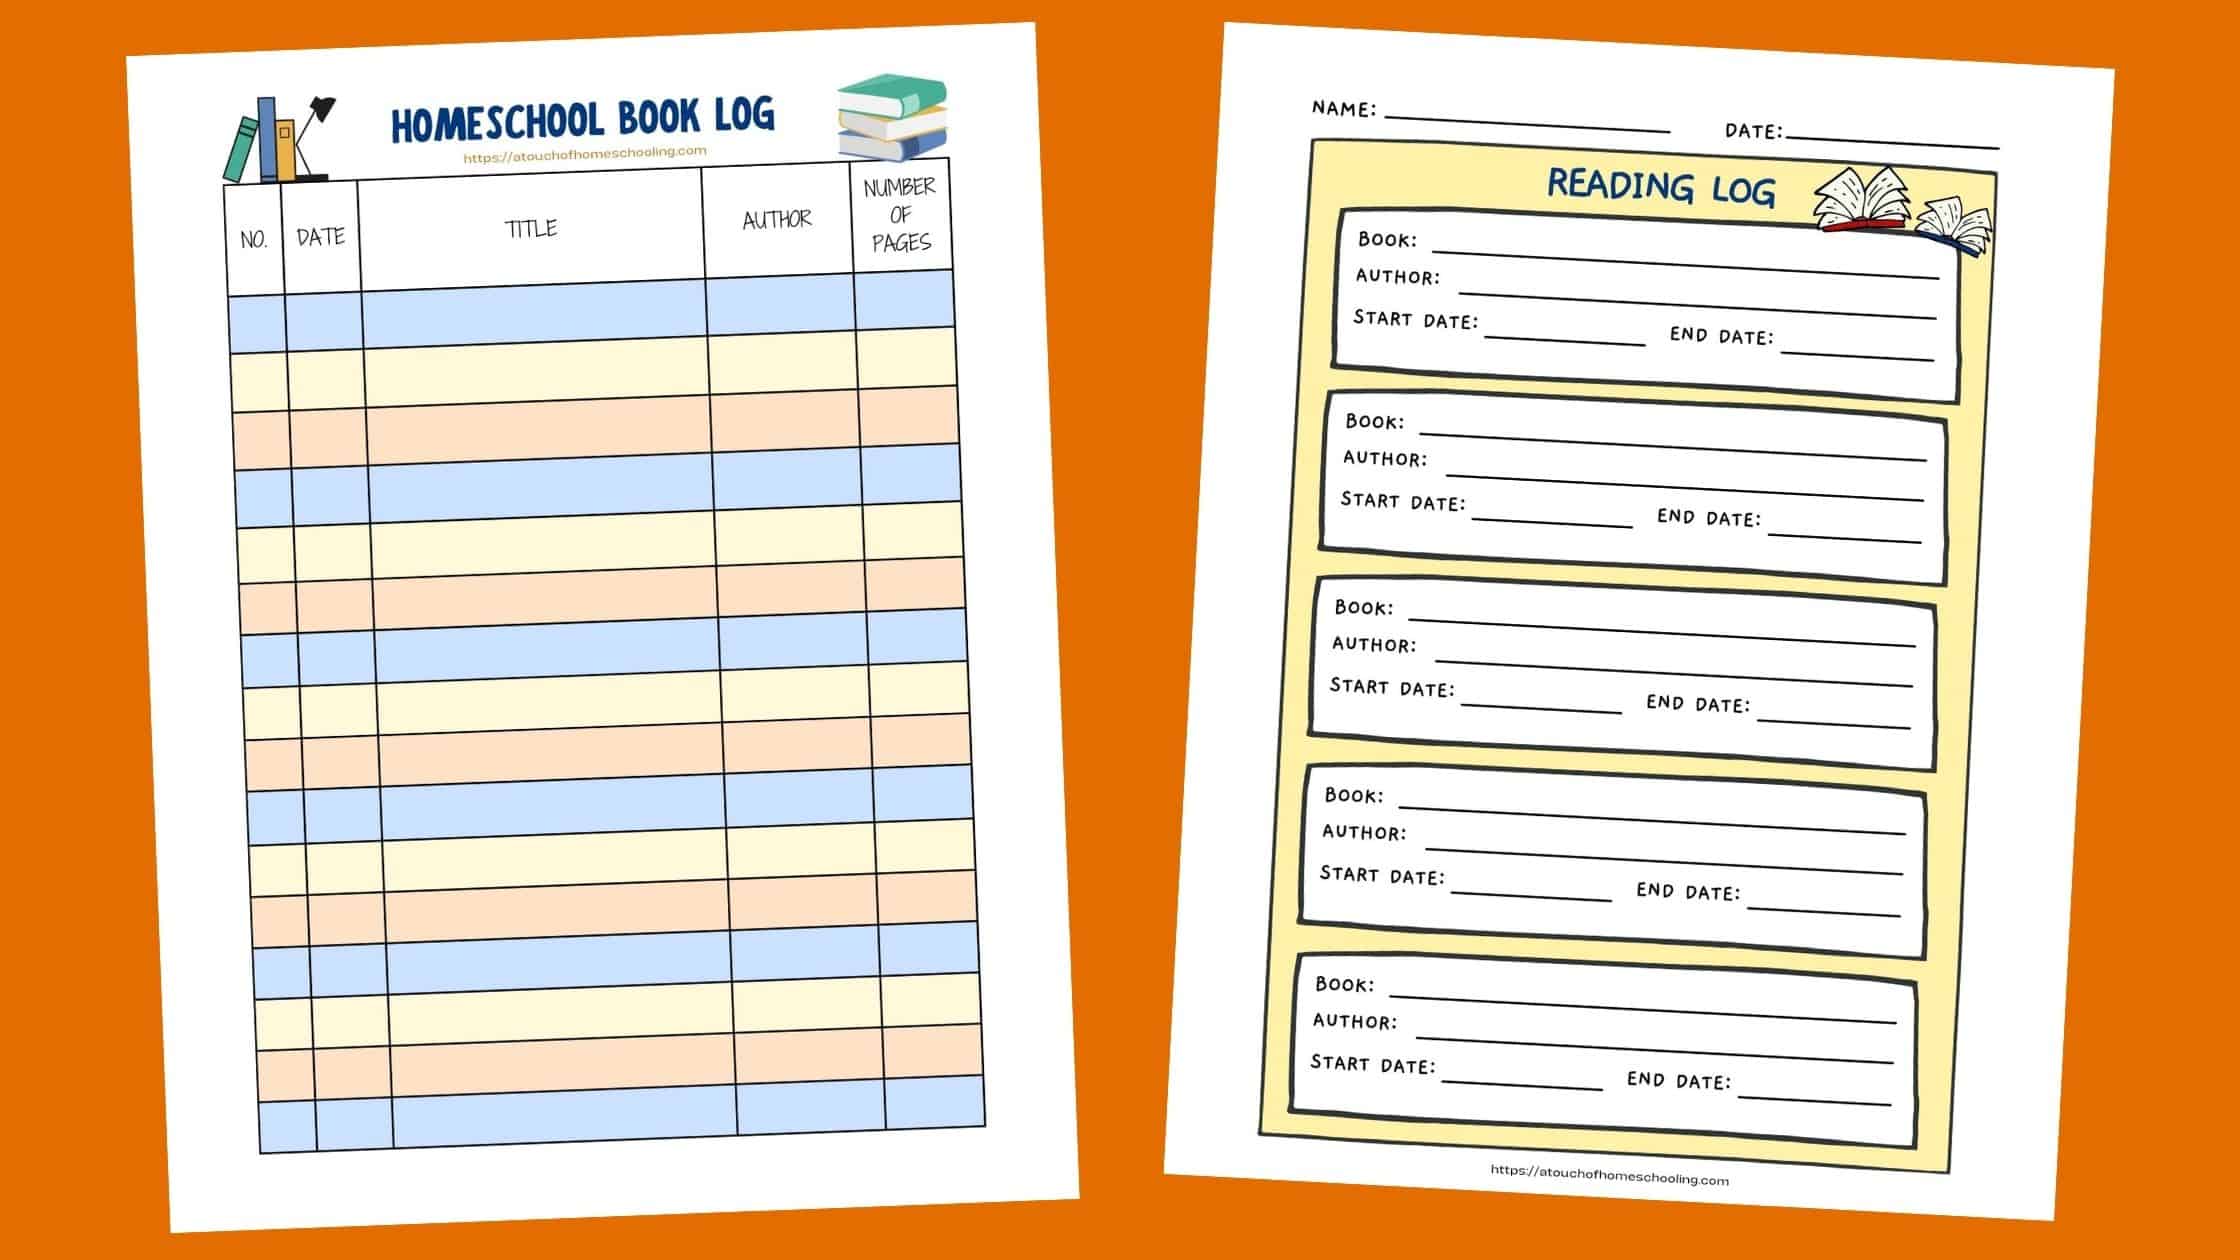 a homeschool book log and a reading log for kids